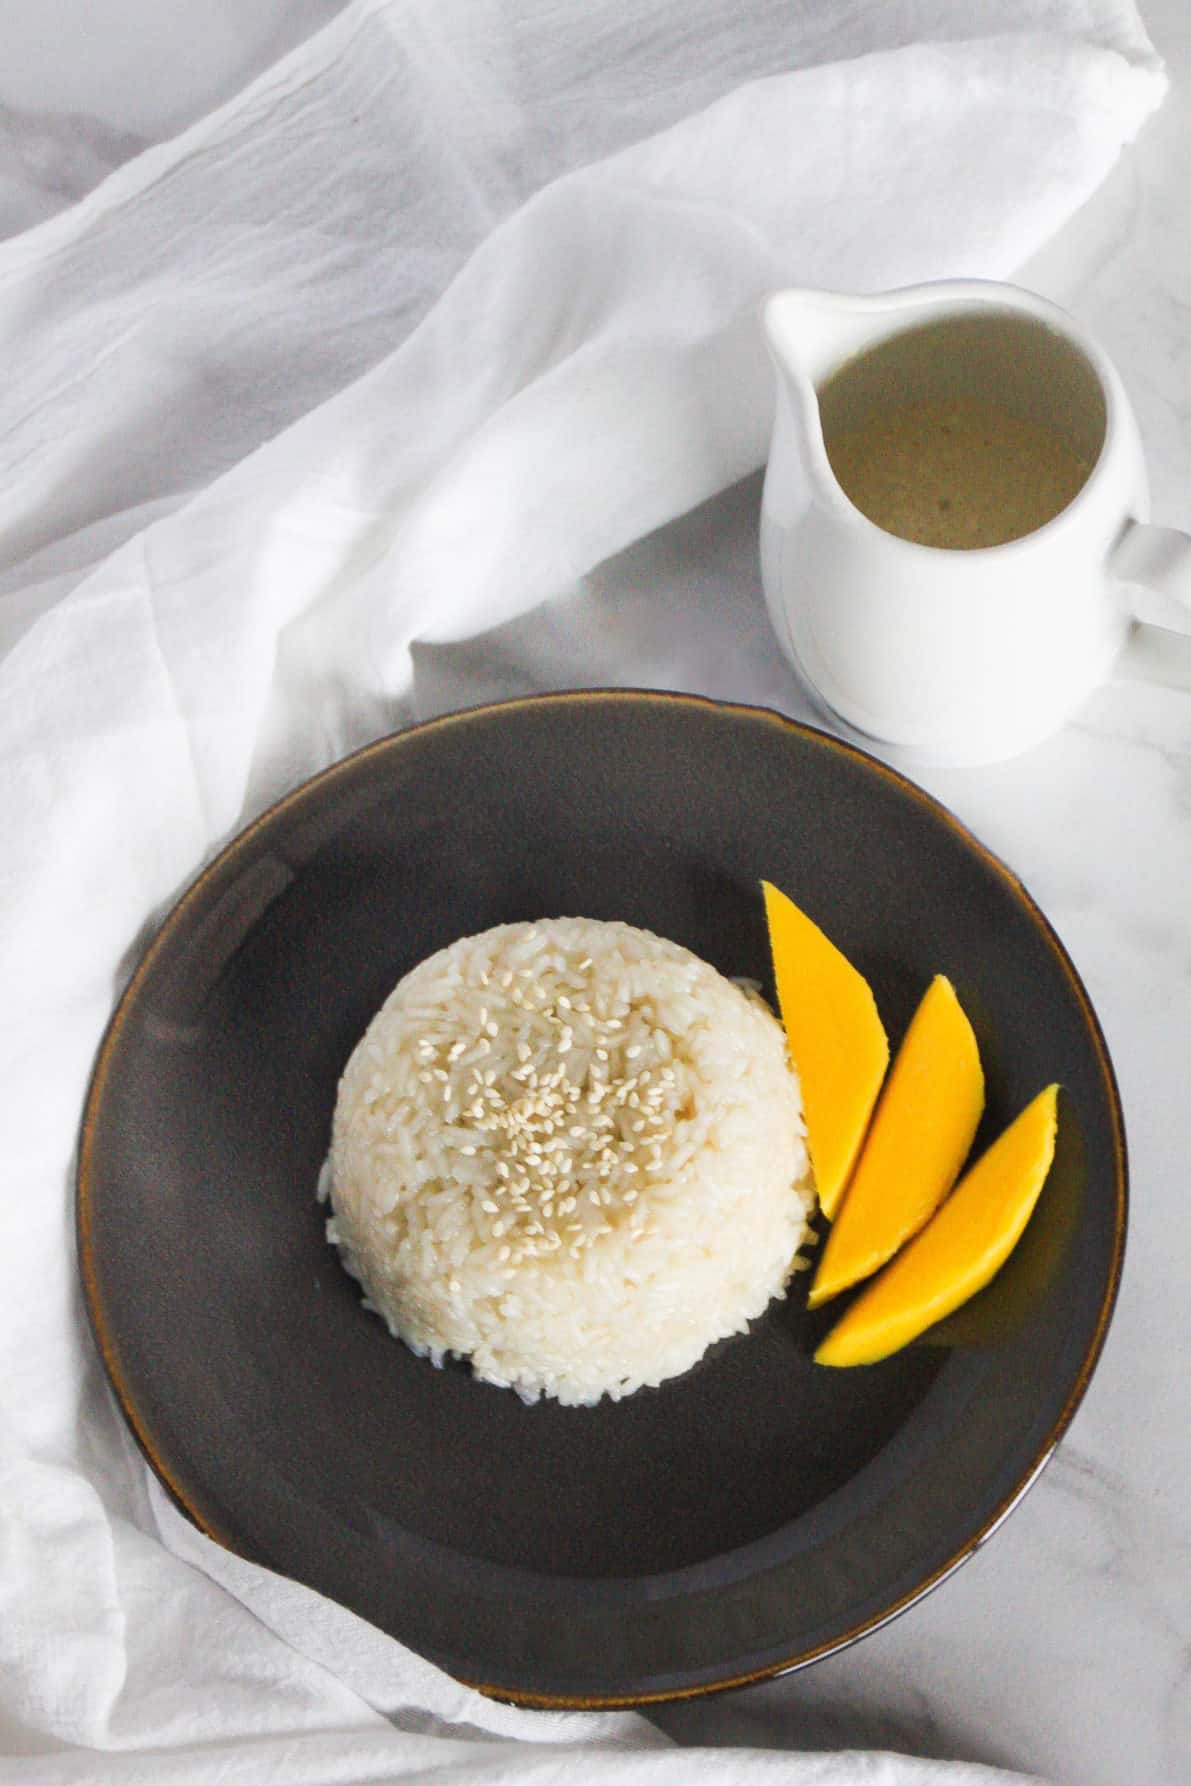 Thai Mango Sticky Rice only uses four ingredients and it's so easy to make! A simple, yet satisfying treat to whip up whenever you are feeling in the mood for something sweet and delectable.